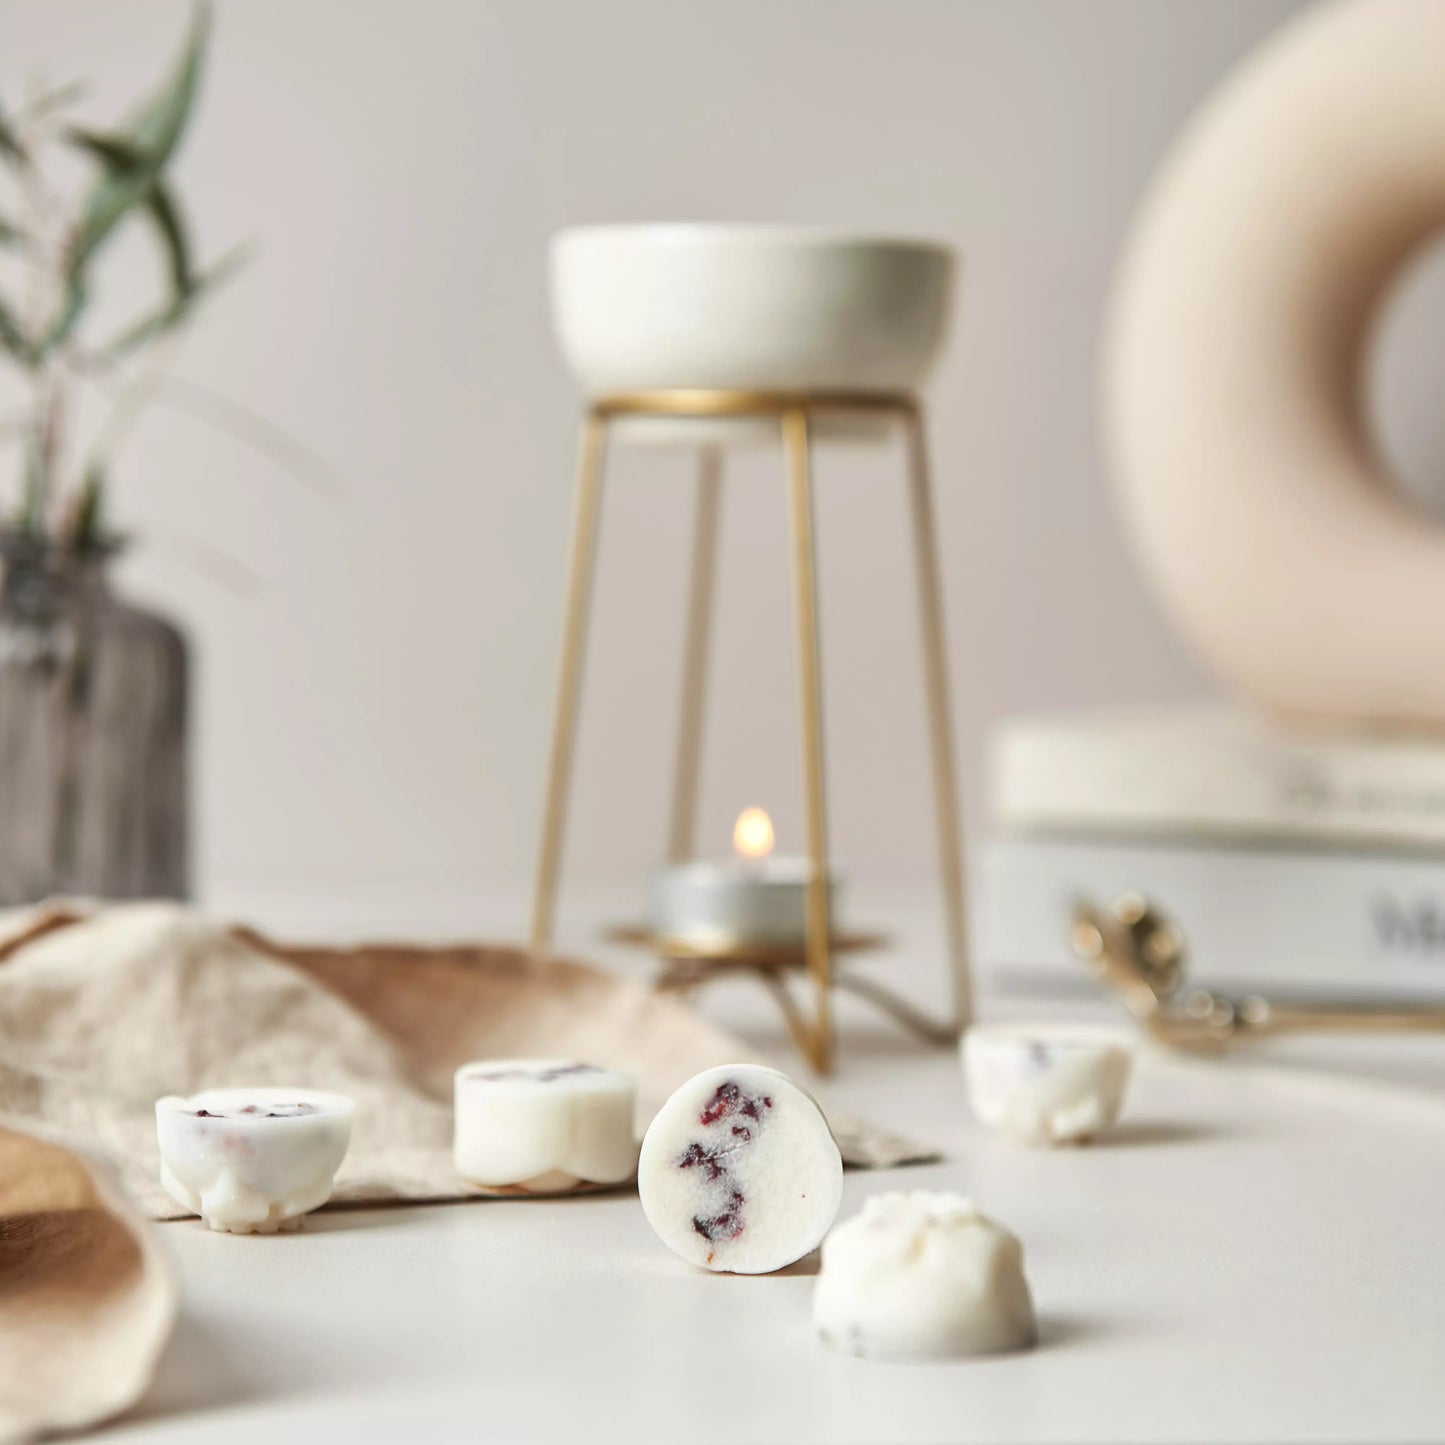 Our Pine and Eucalyptus Wax Melts are loosely scattered with a bronze wax warmer and a tea light in the background.